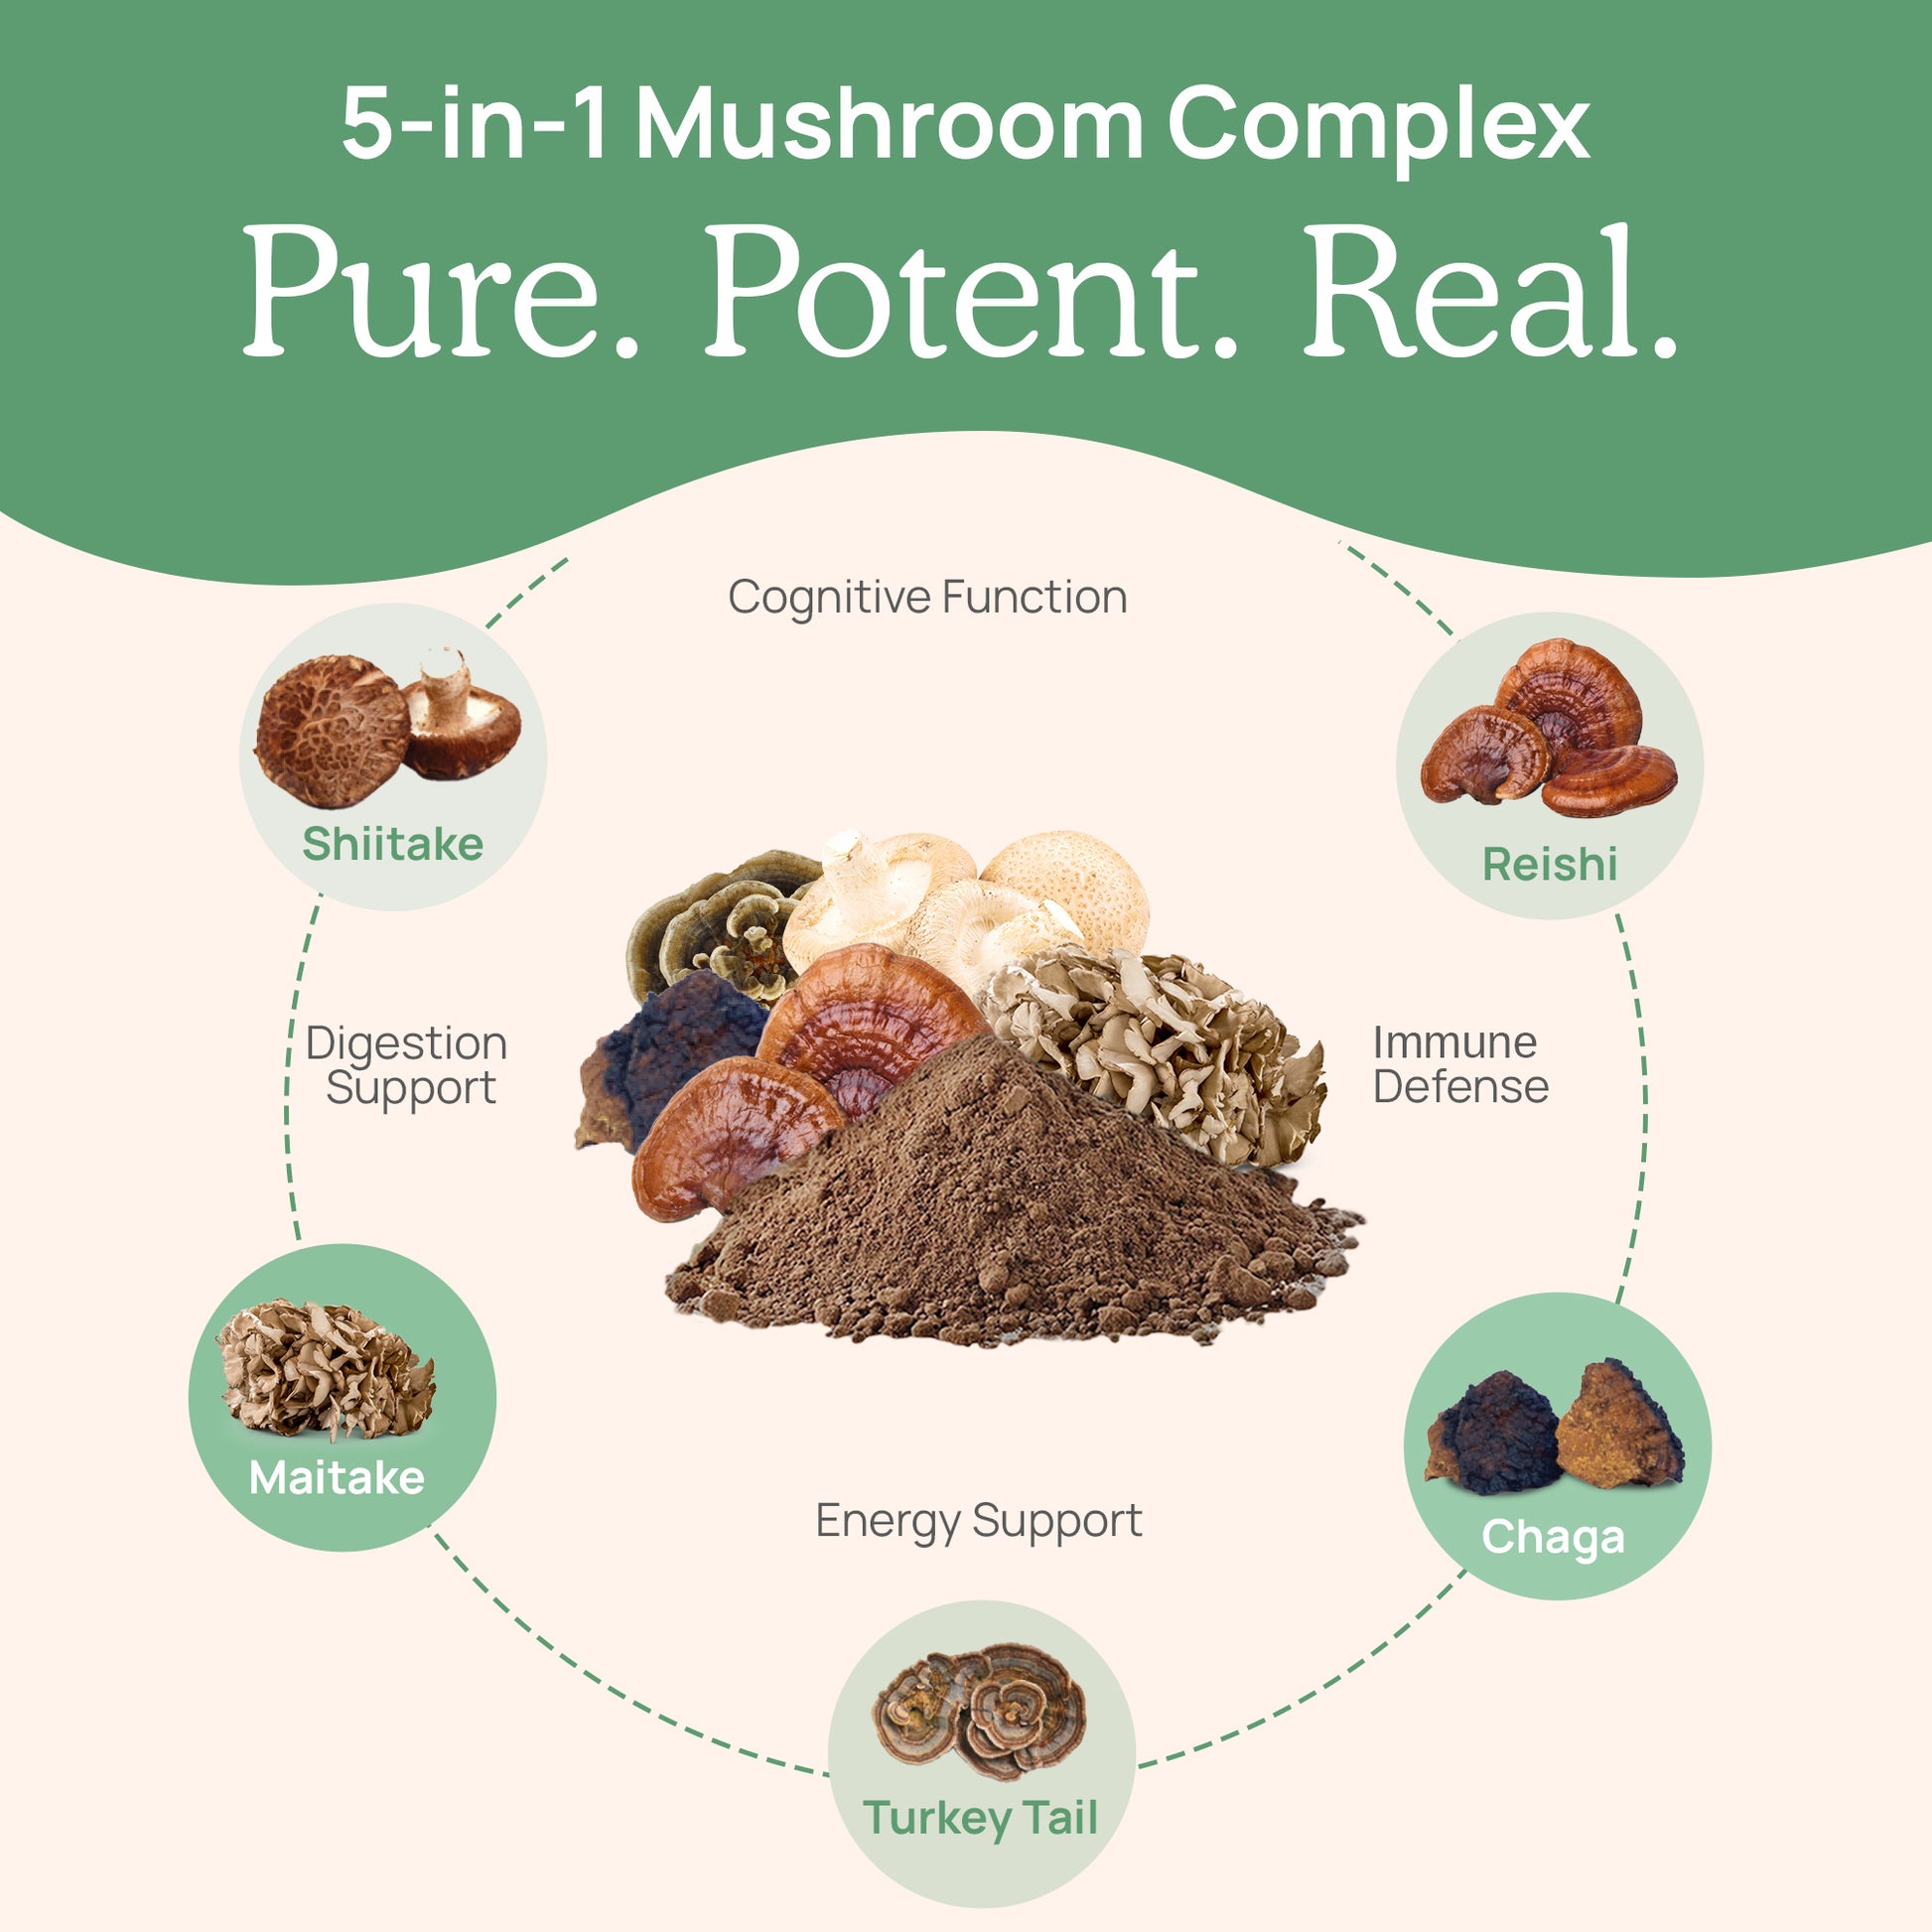 An infographic presenting Real Mushrooms' "5 Defenders Organic Mushroom Complex – Bulk Powder" with claims of health benefits such as cognitive function, immune defense, energy support, and digestion support, alongside images of various mushrooms and a pile.